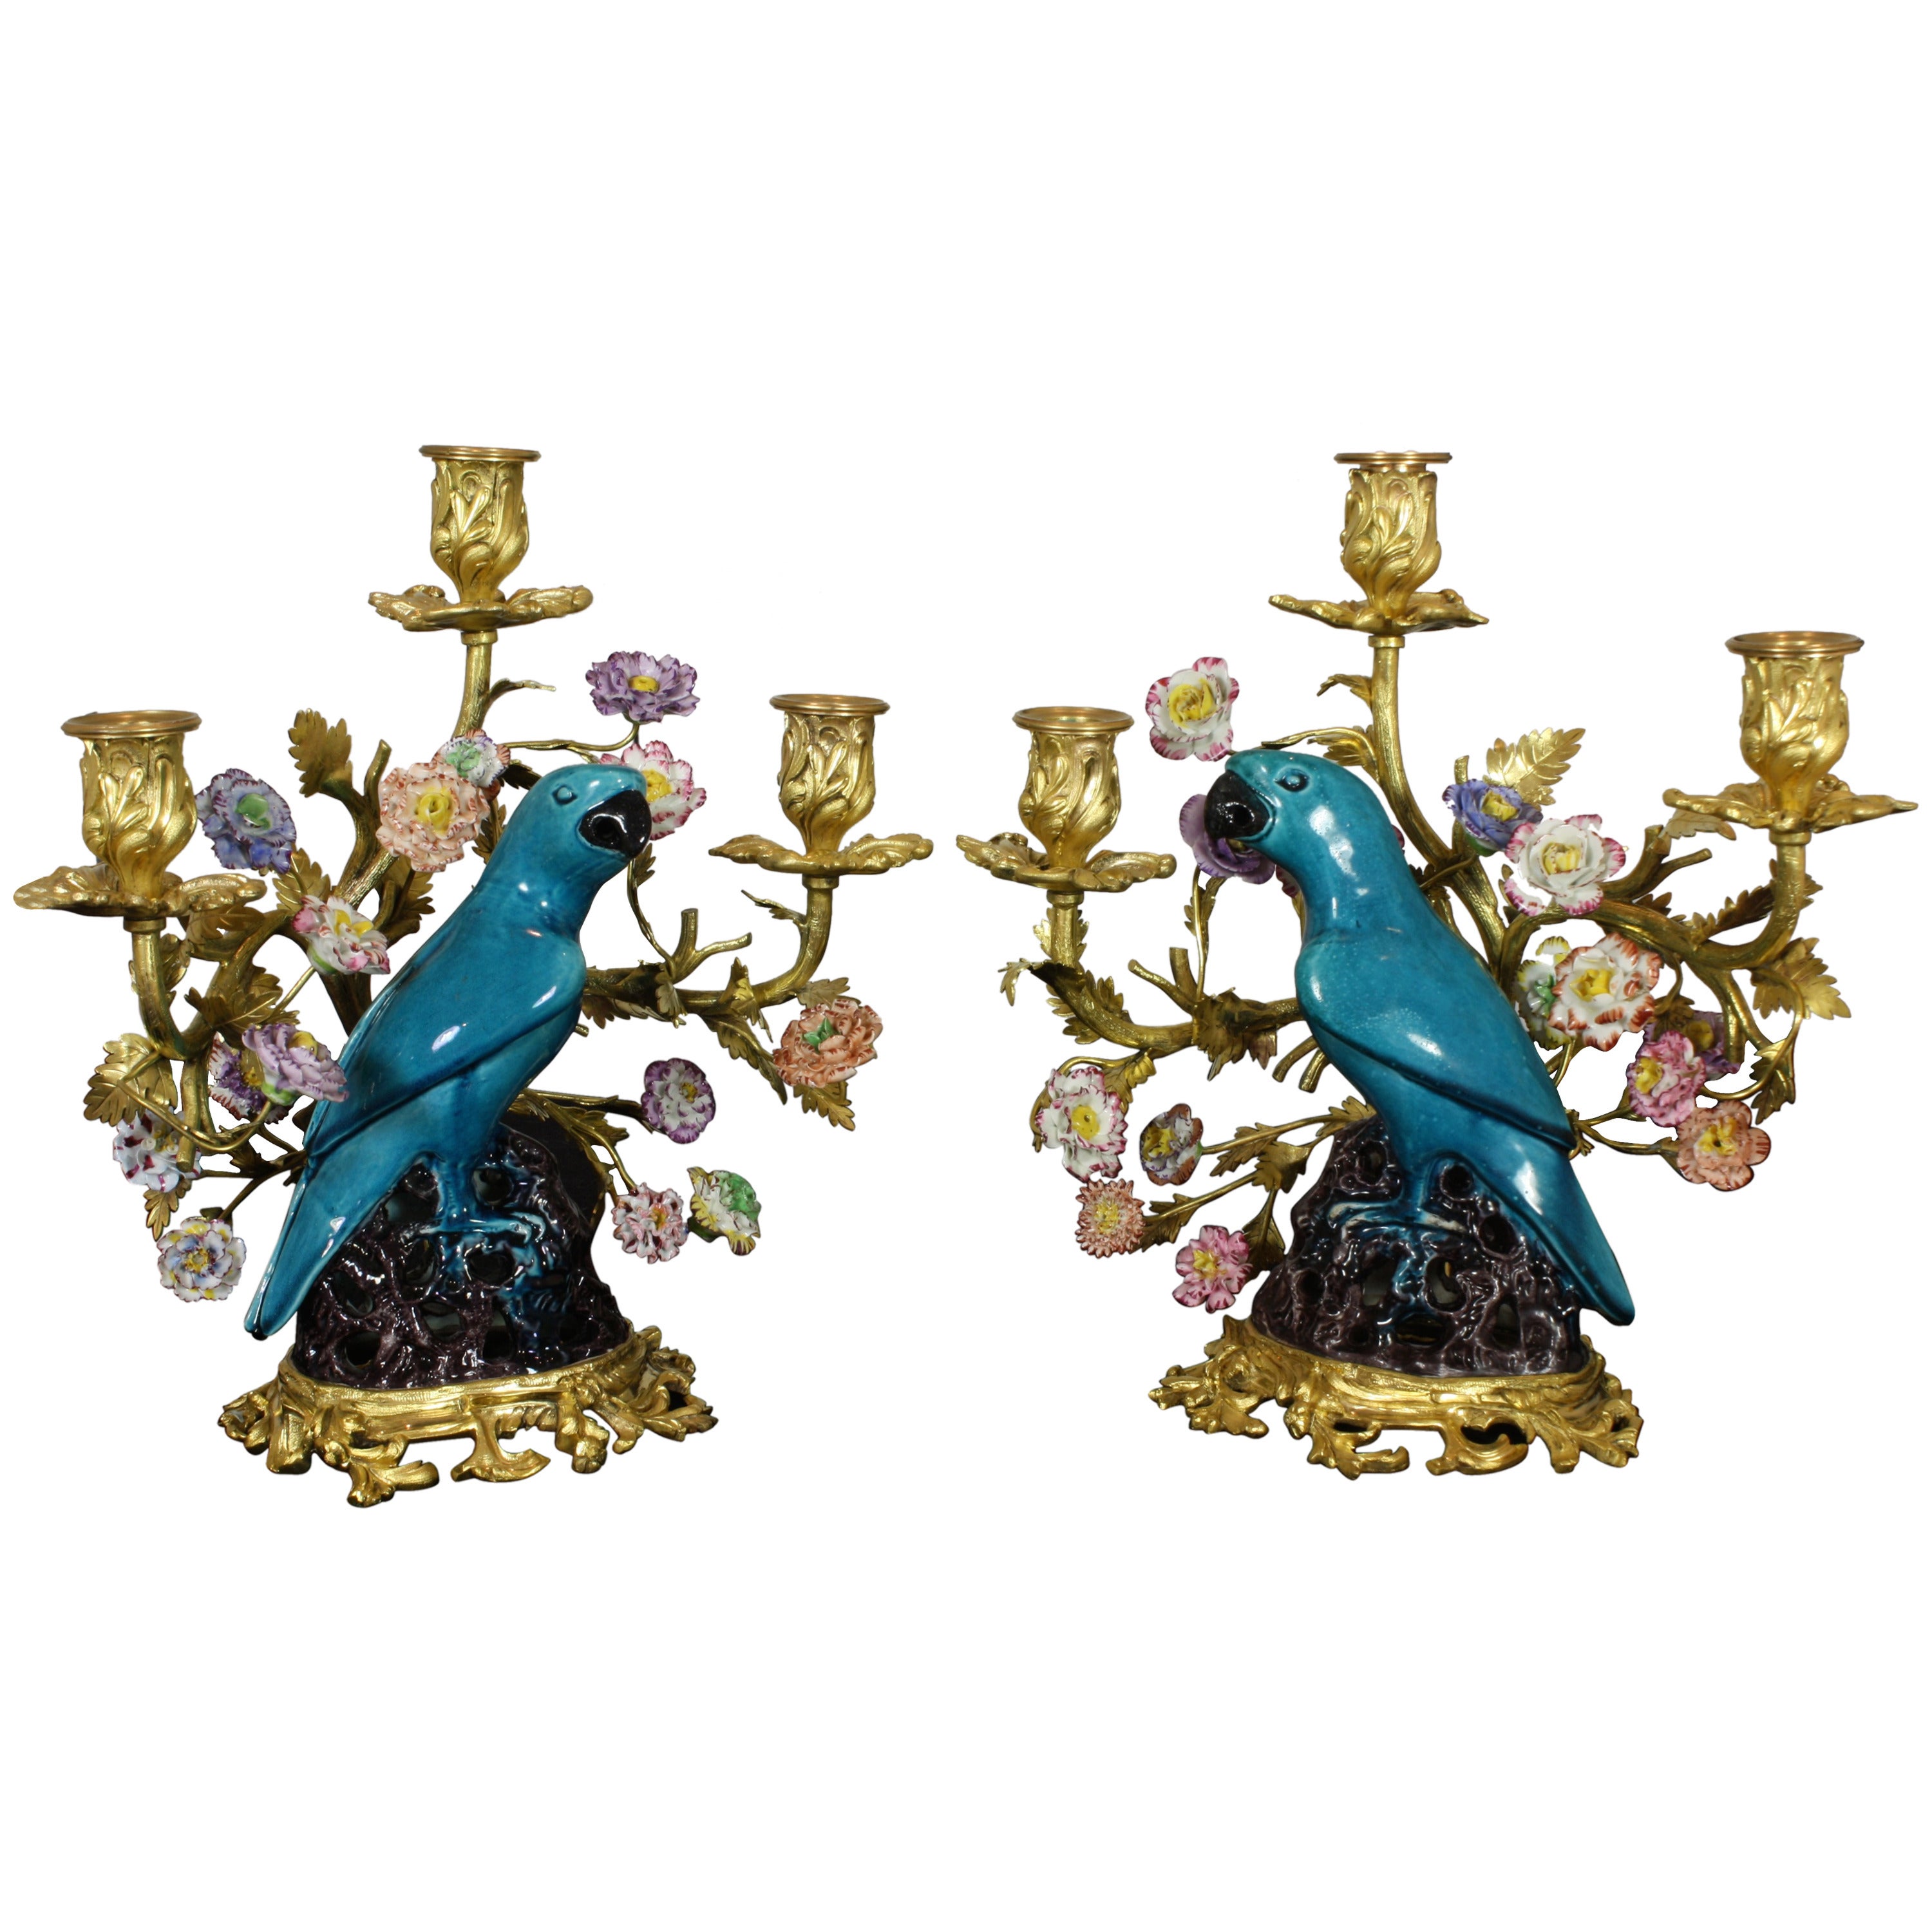 Pair of French Gilt Bronze and Chinese Ceramic Parrot Candelabras